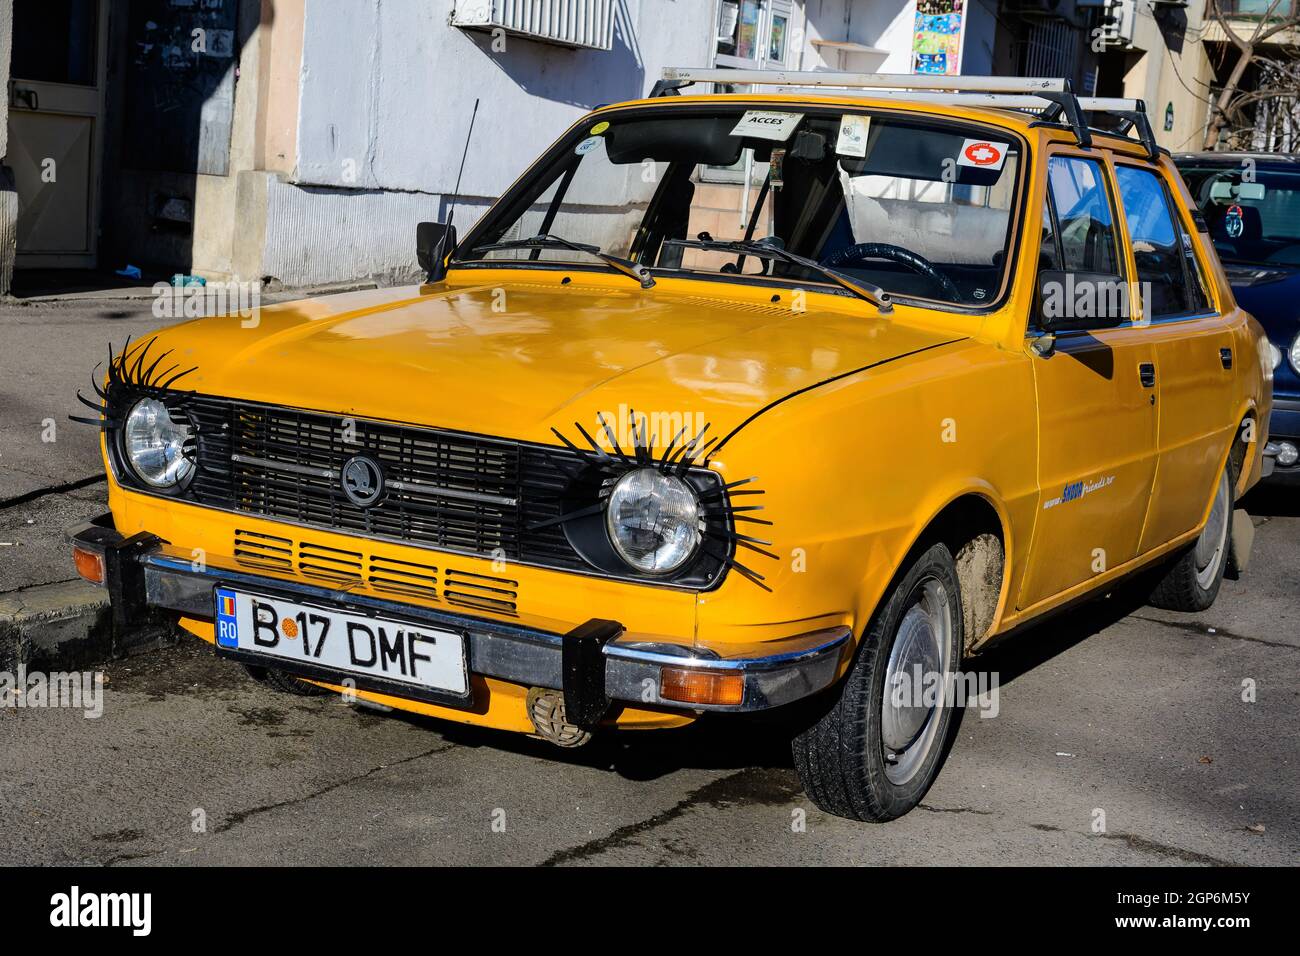 Bucharest, Romania, 1 January 2021 Old yellow Skoda car from Checz Republic, decorated on a street in a sunny winter day Stock Photo